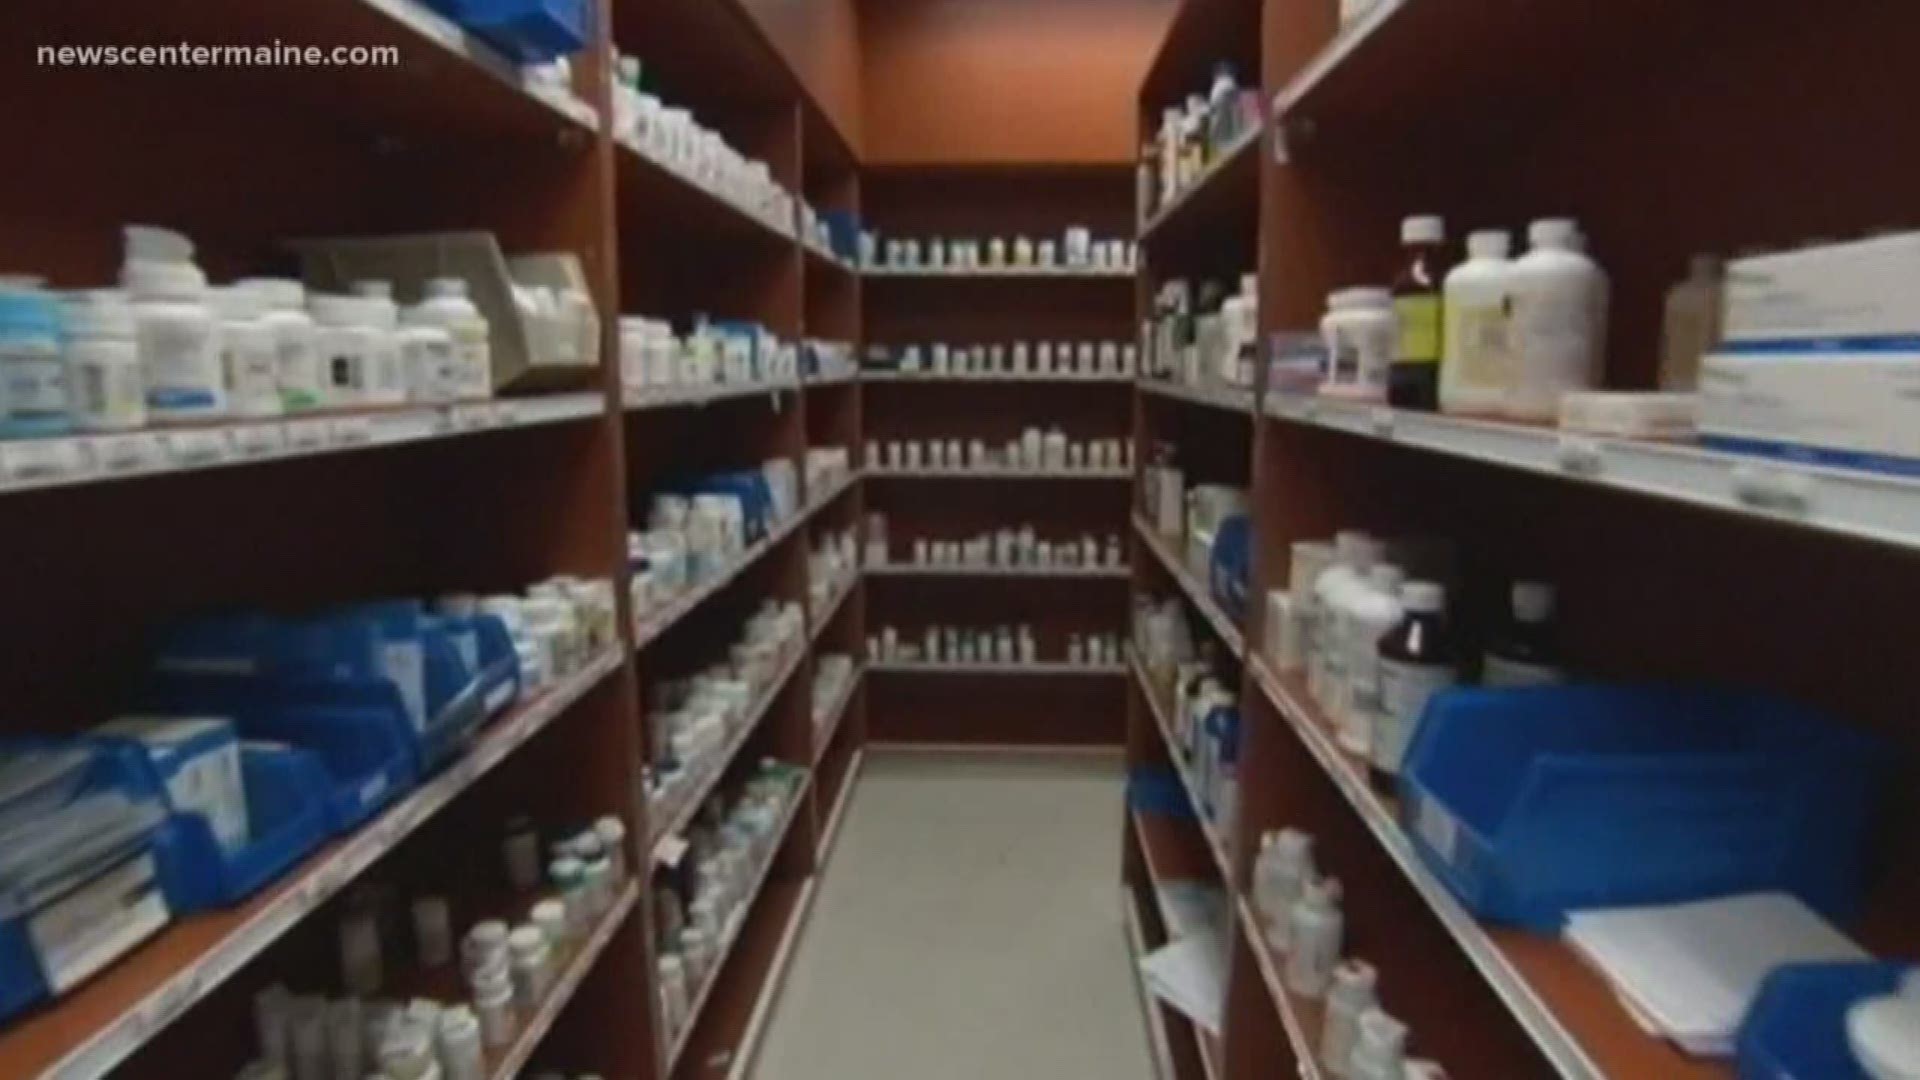 The law, designed to lower prescription drug prices, goes into effect in September.